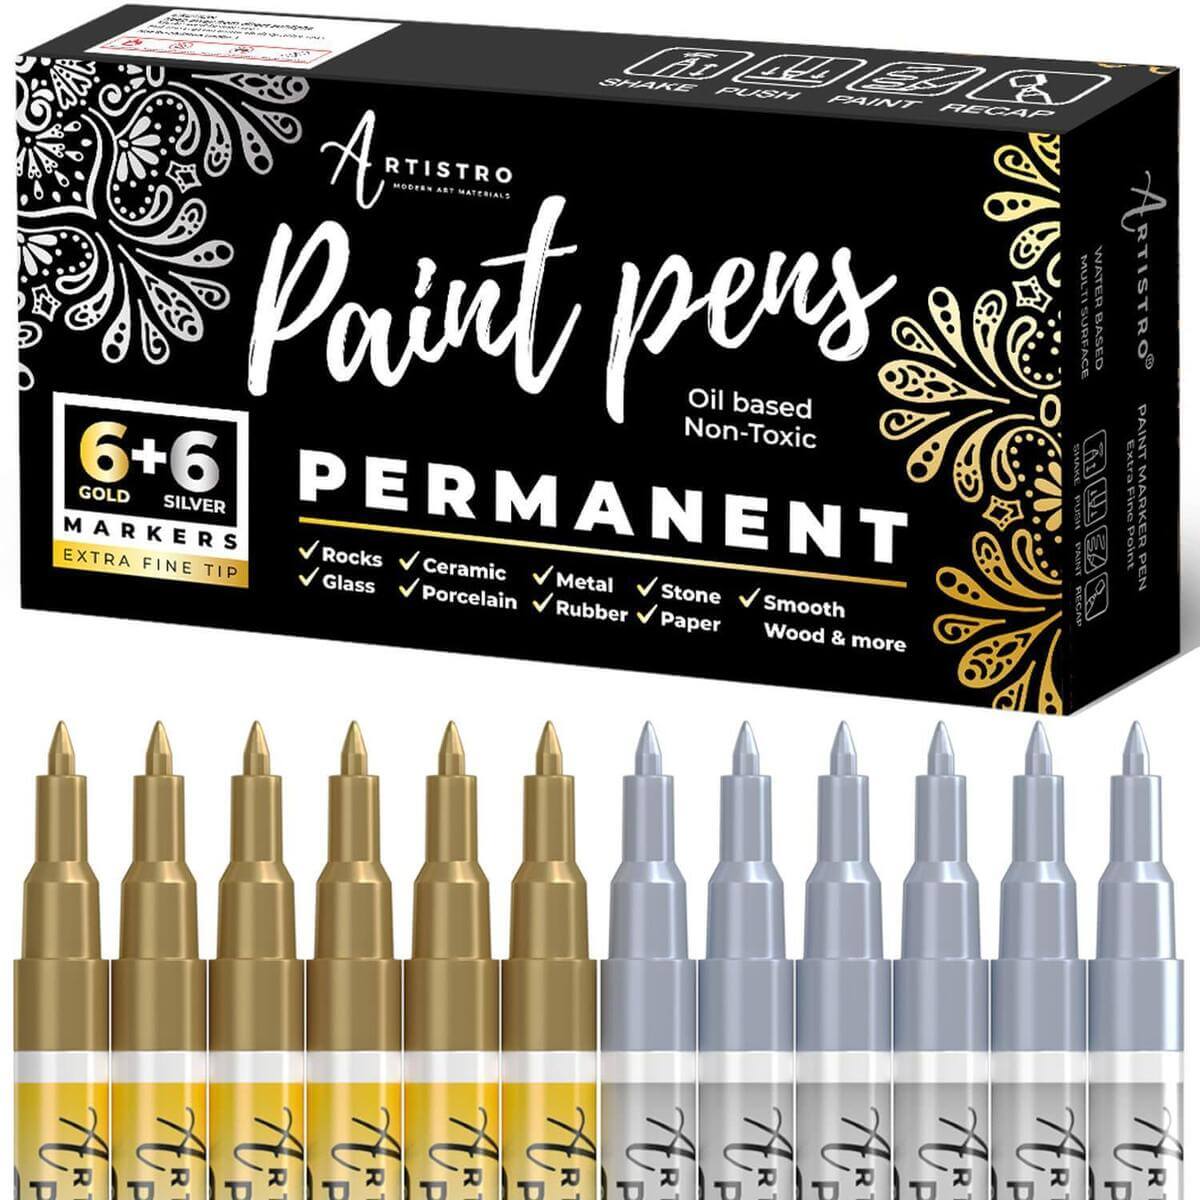  ARTISTRO 15 Permanent Oil Based Paint Markers Fine Tip